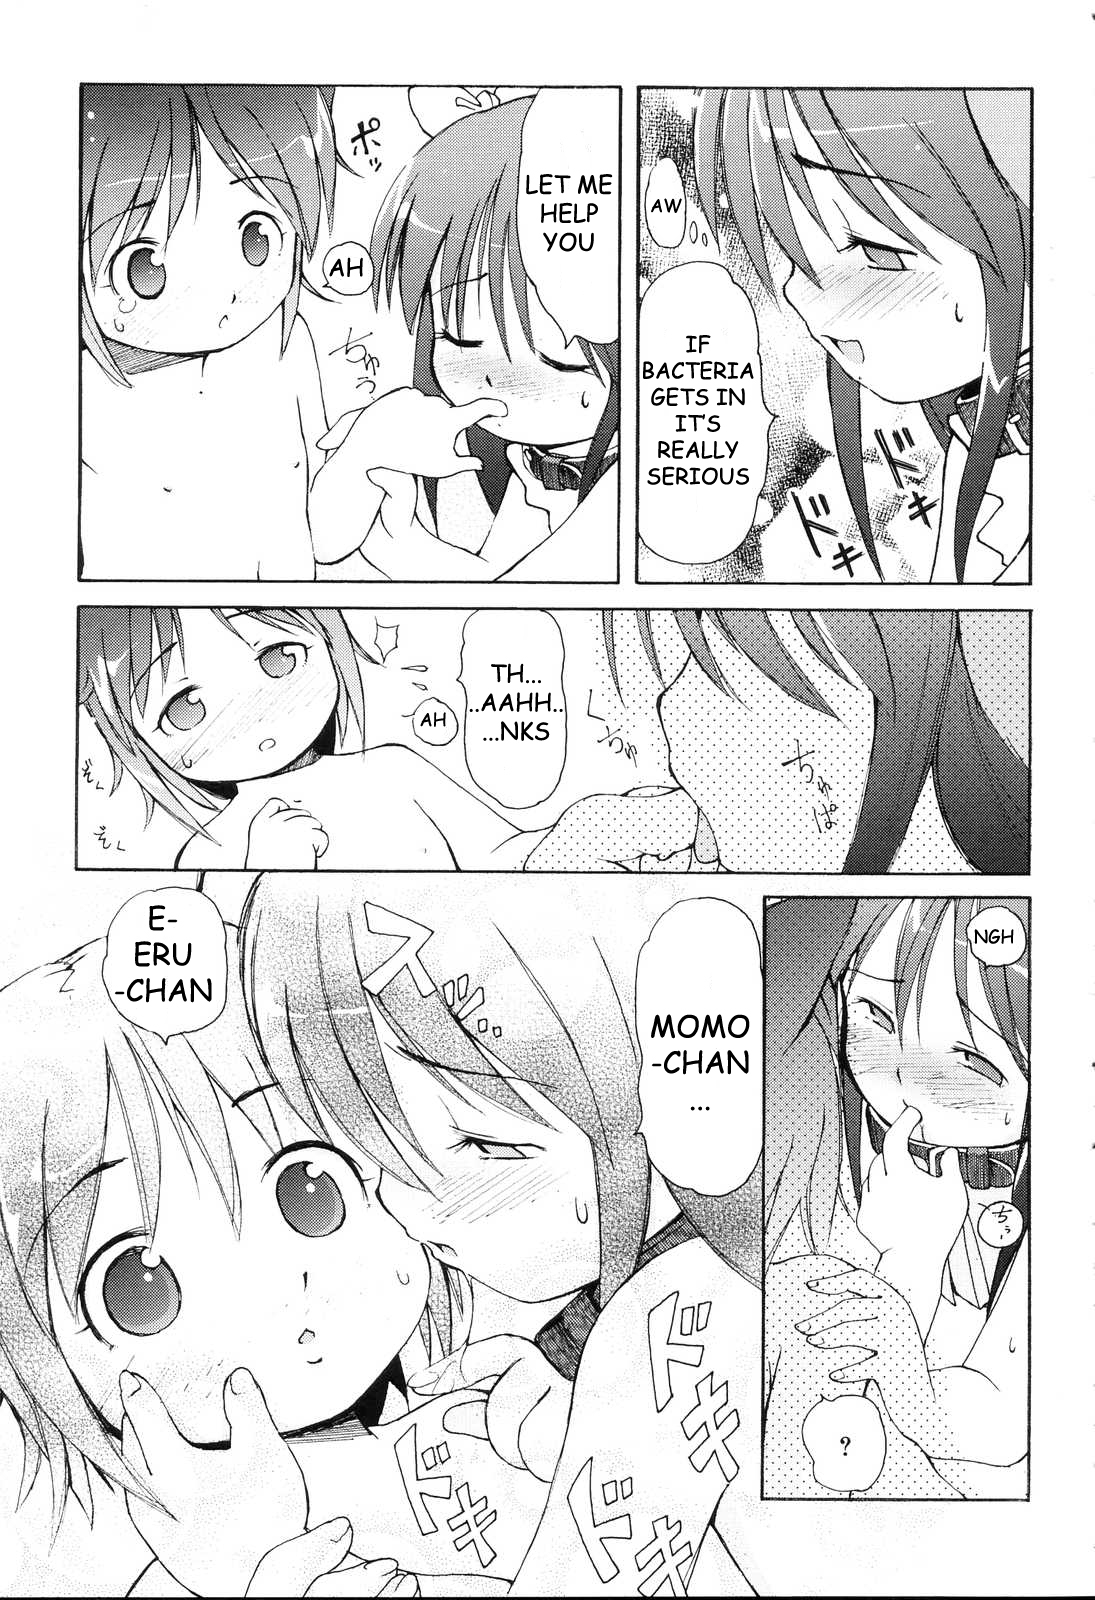 How the Puppy Licks her Adorable Rival 6 hentai manga